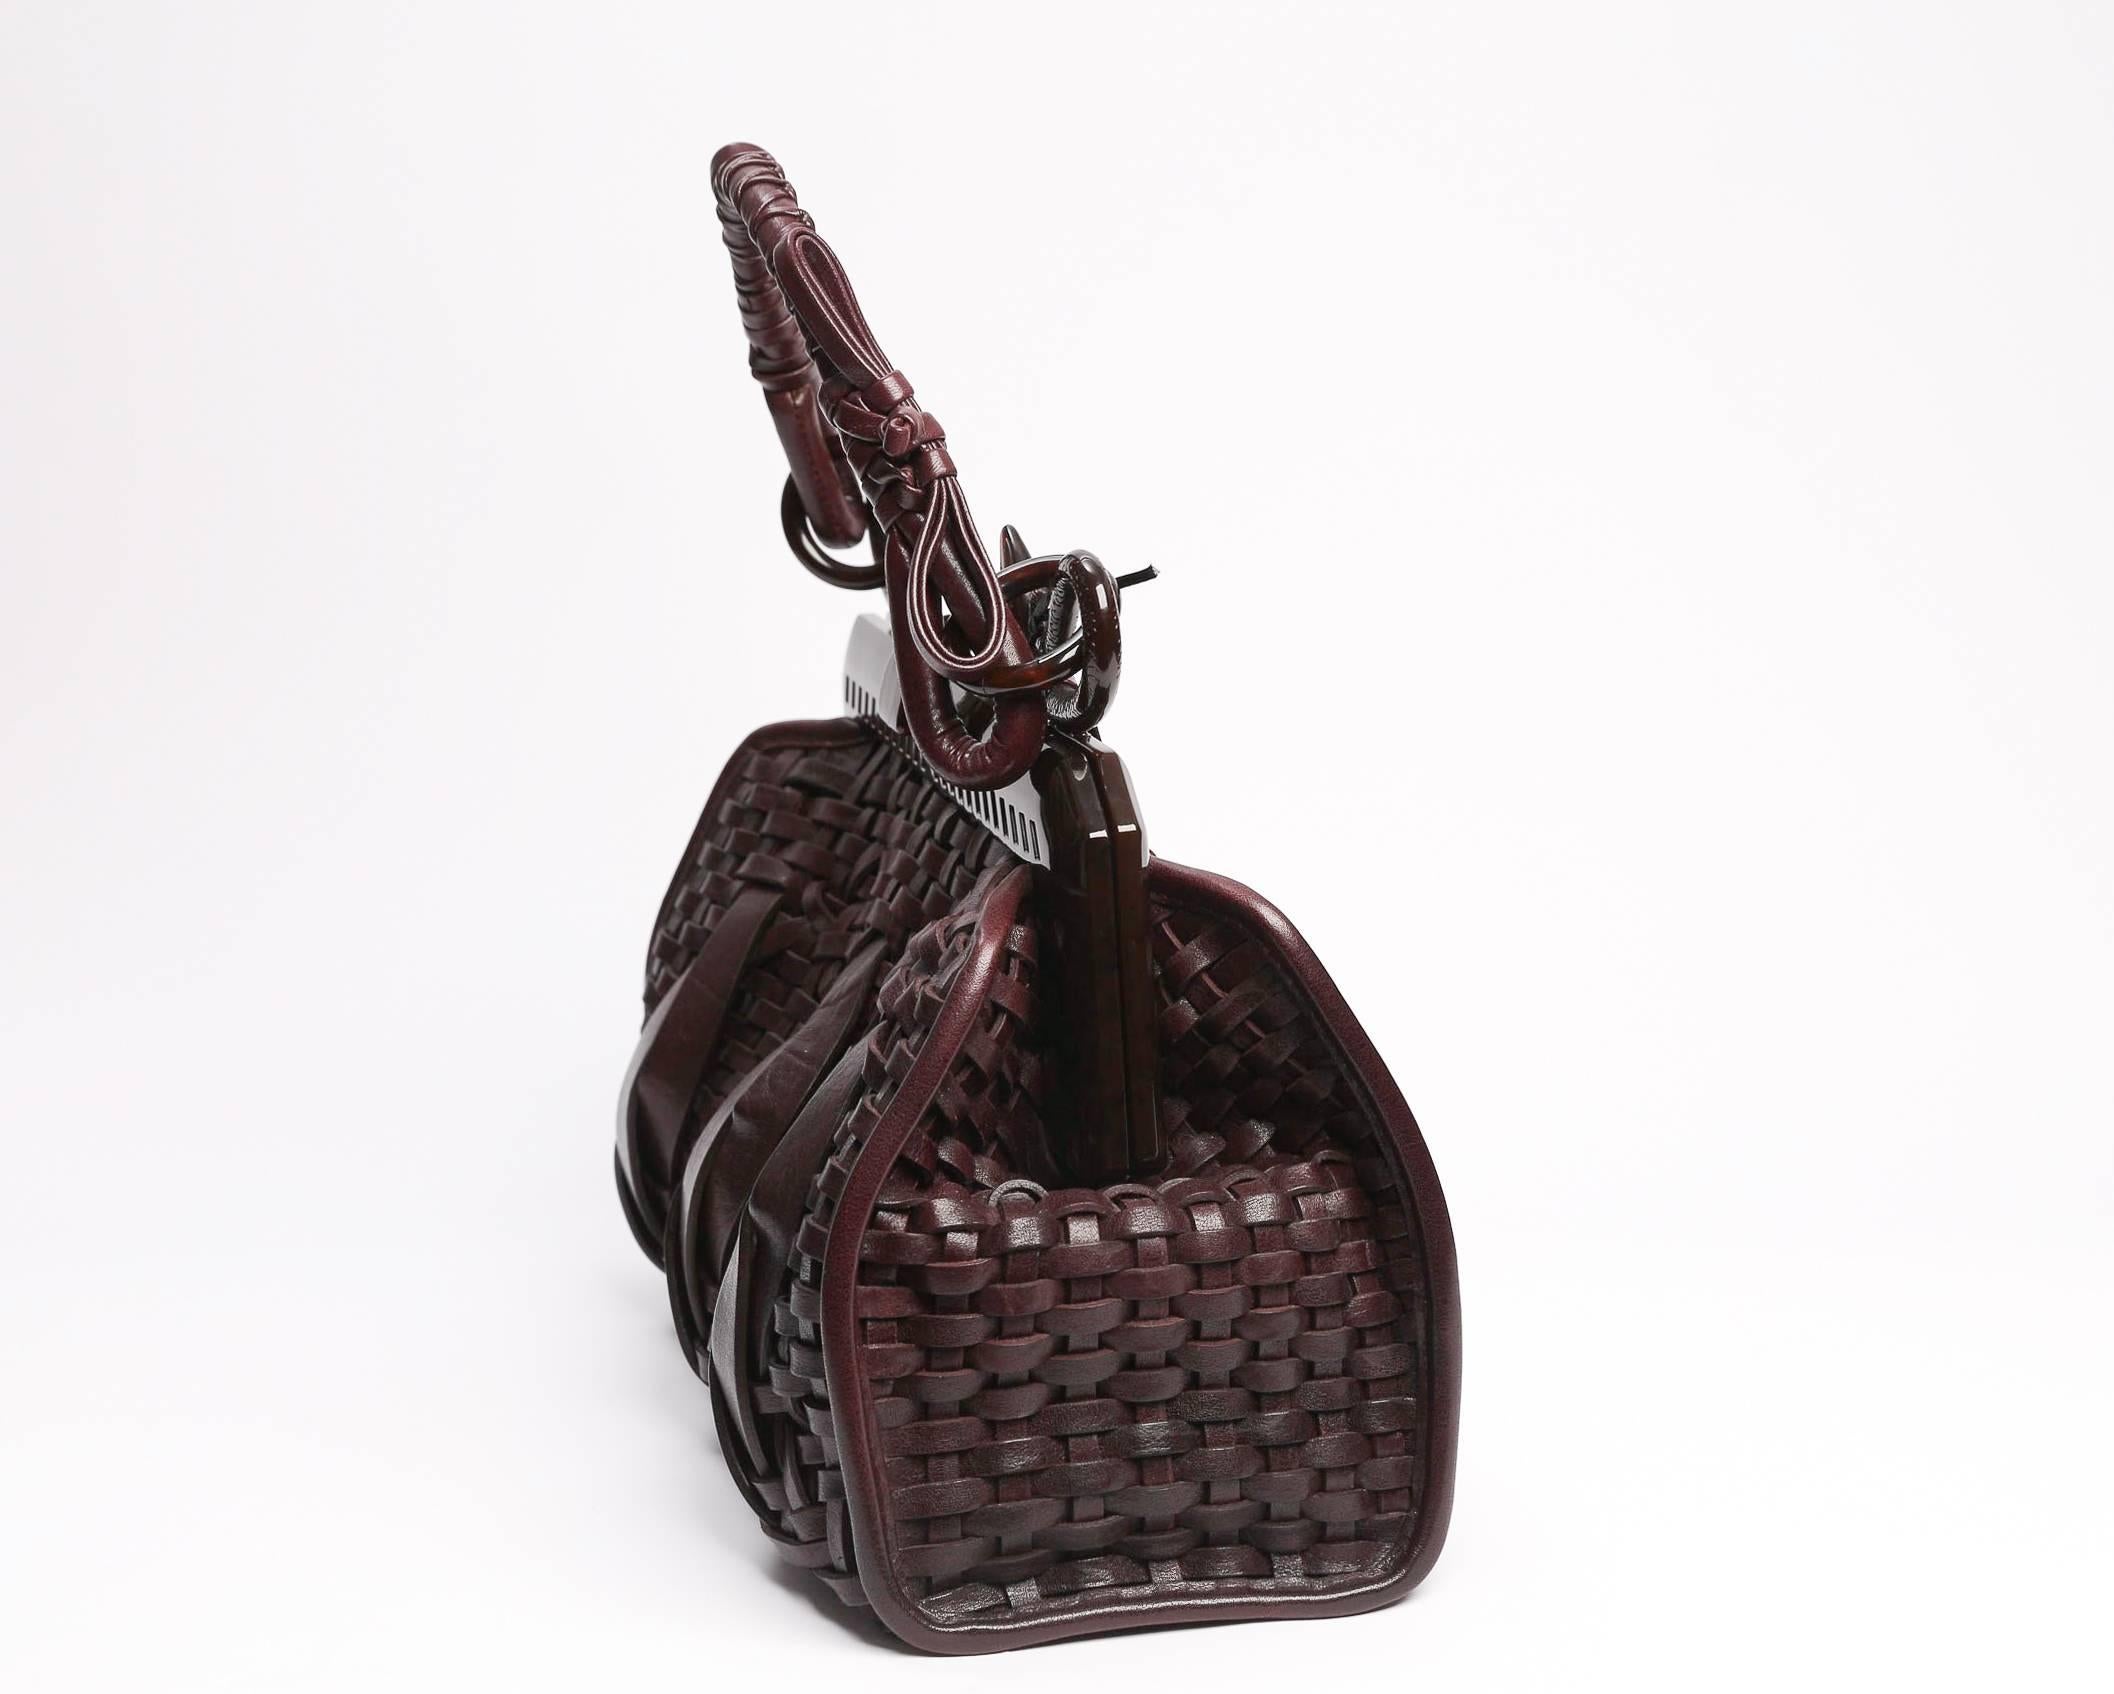 Dark brown woven leather Christian Dior Samourai handle bag with snake motif at handle, interior zip pocket and top flip-lock closure.
Brown Christian Dior lining.
Strap drop 7 inches.
New with tags, care cards and original duster.